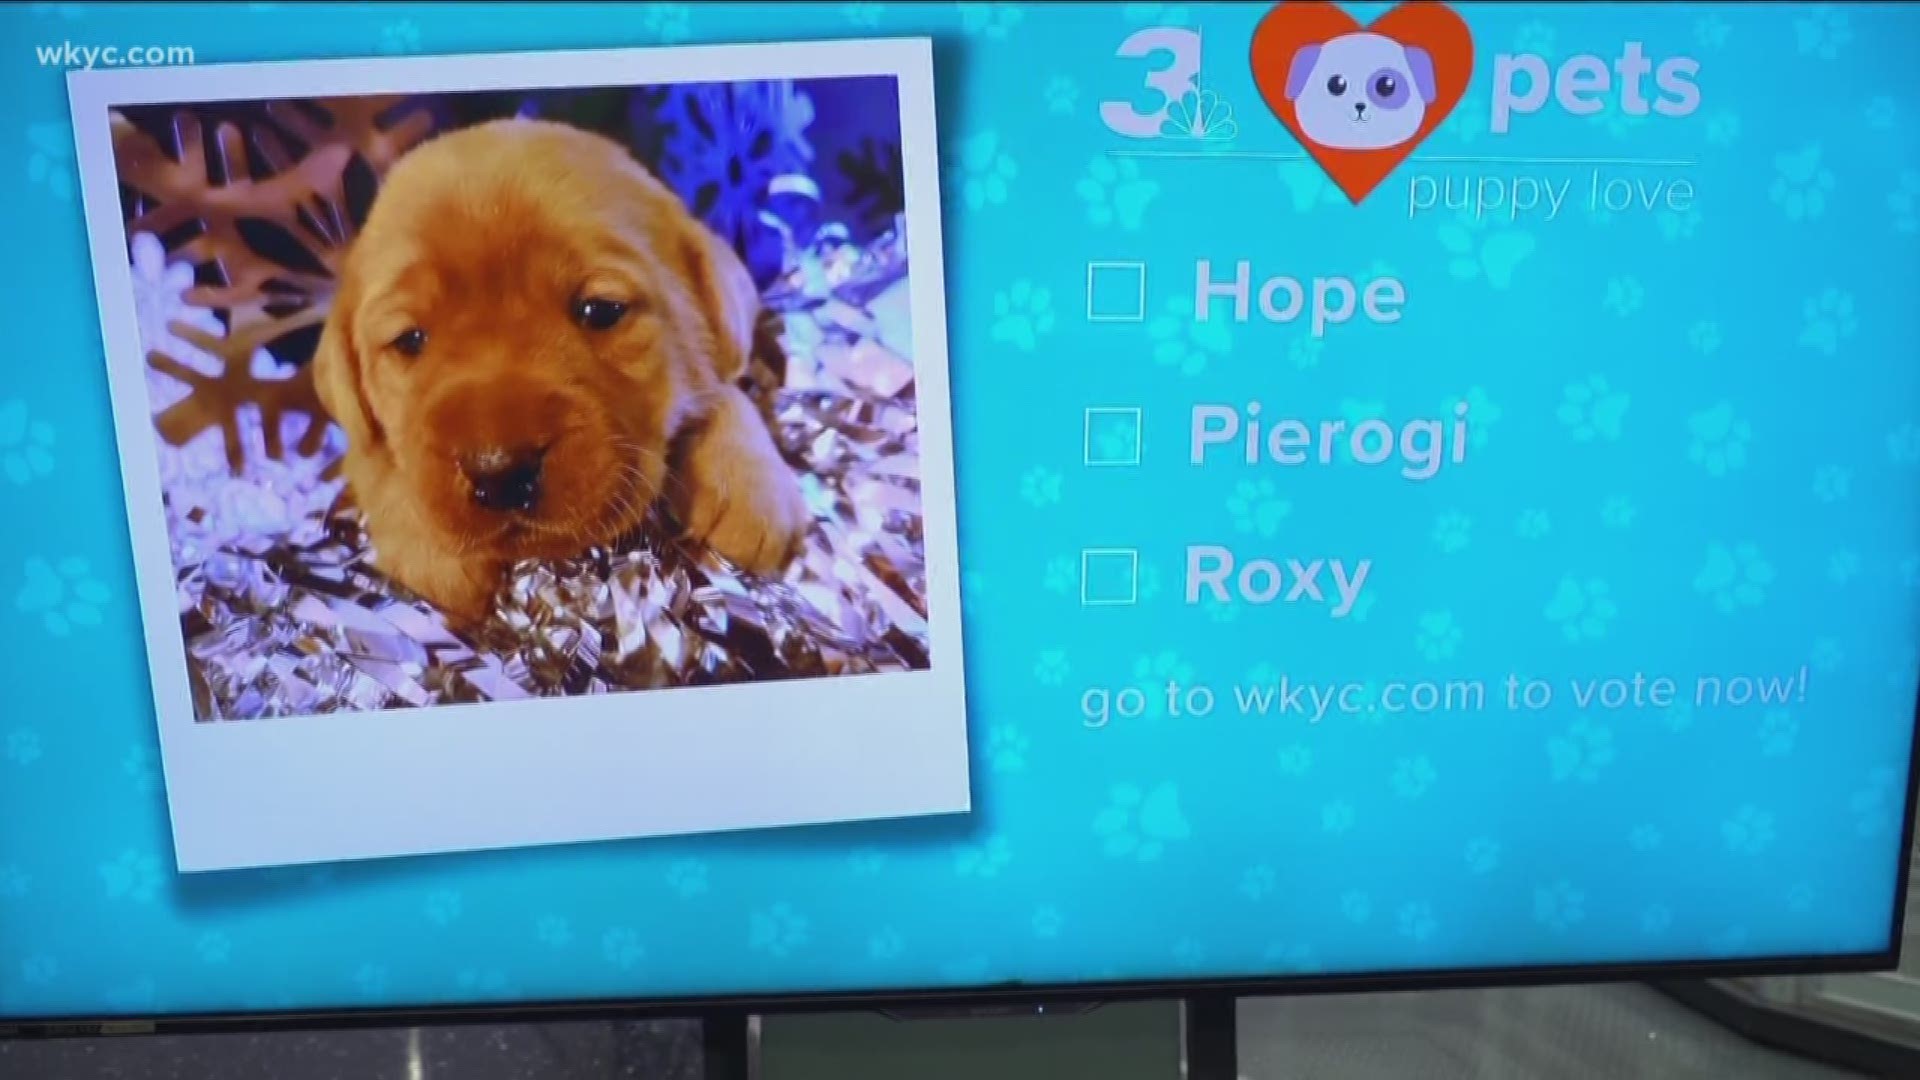 Feb. 7, 2019: Last week we revealed the first photo of an adorable fox red Labrador Retriever that is becoming part of the Channel 3 team through a partnership with Wags 4 Warriors. But now… We need your help in picking the perfect name for our puppy.